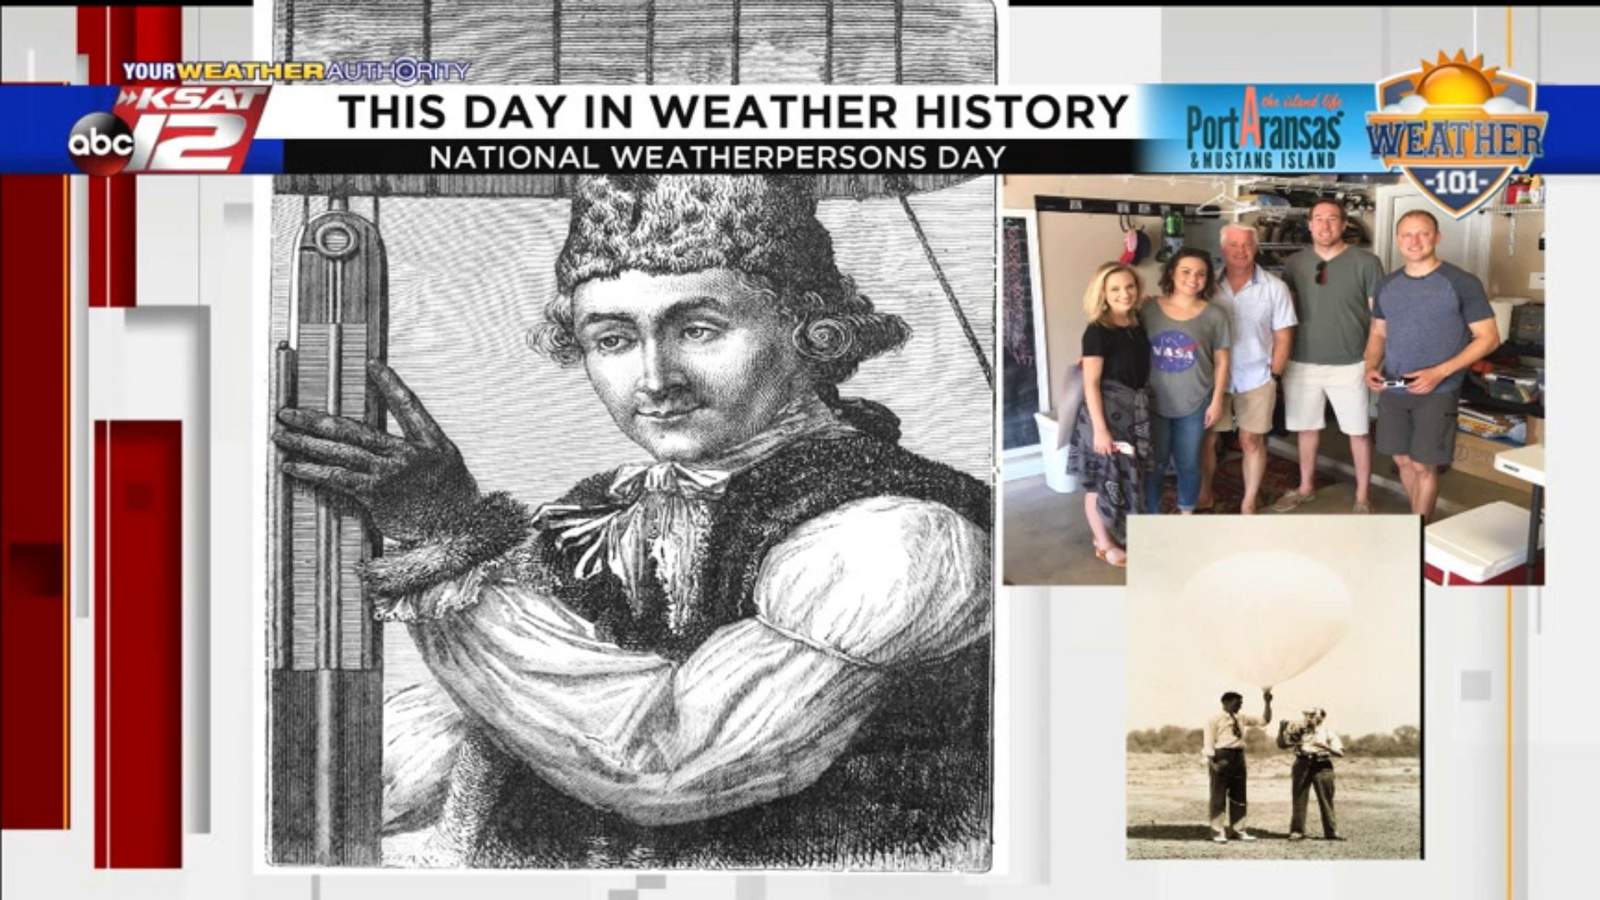 This Day in Weather History: February 5th